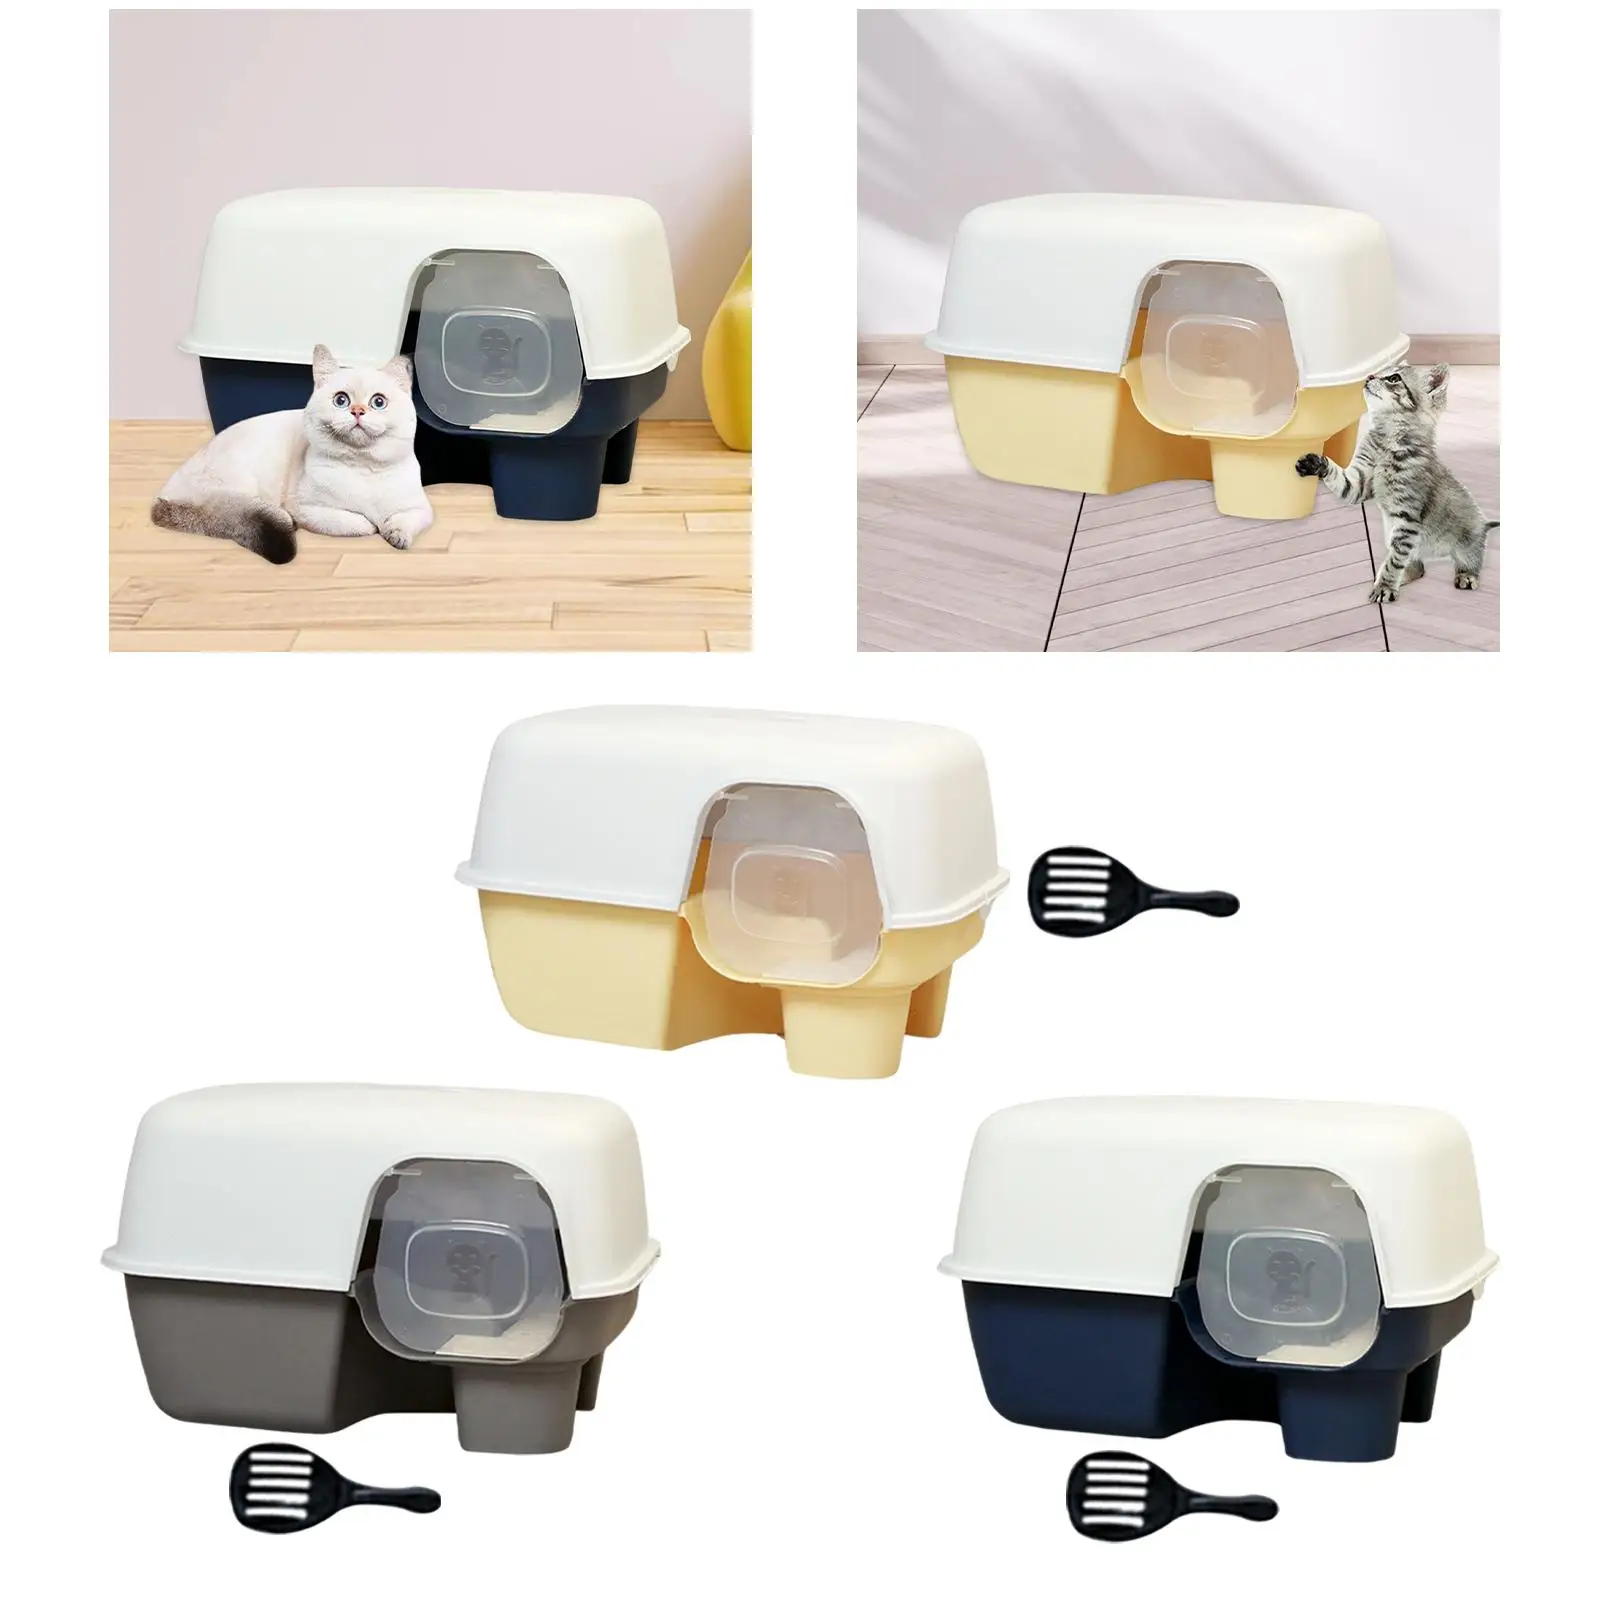 Corridor Enclosed Cat Litter Box Detachable with Gate Portable High Side Cat Bedpans Pet Supplies Easy Clean Kitty Litter Pan